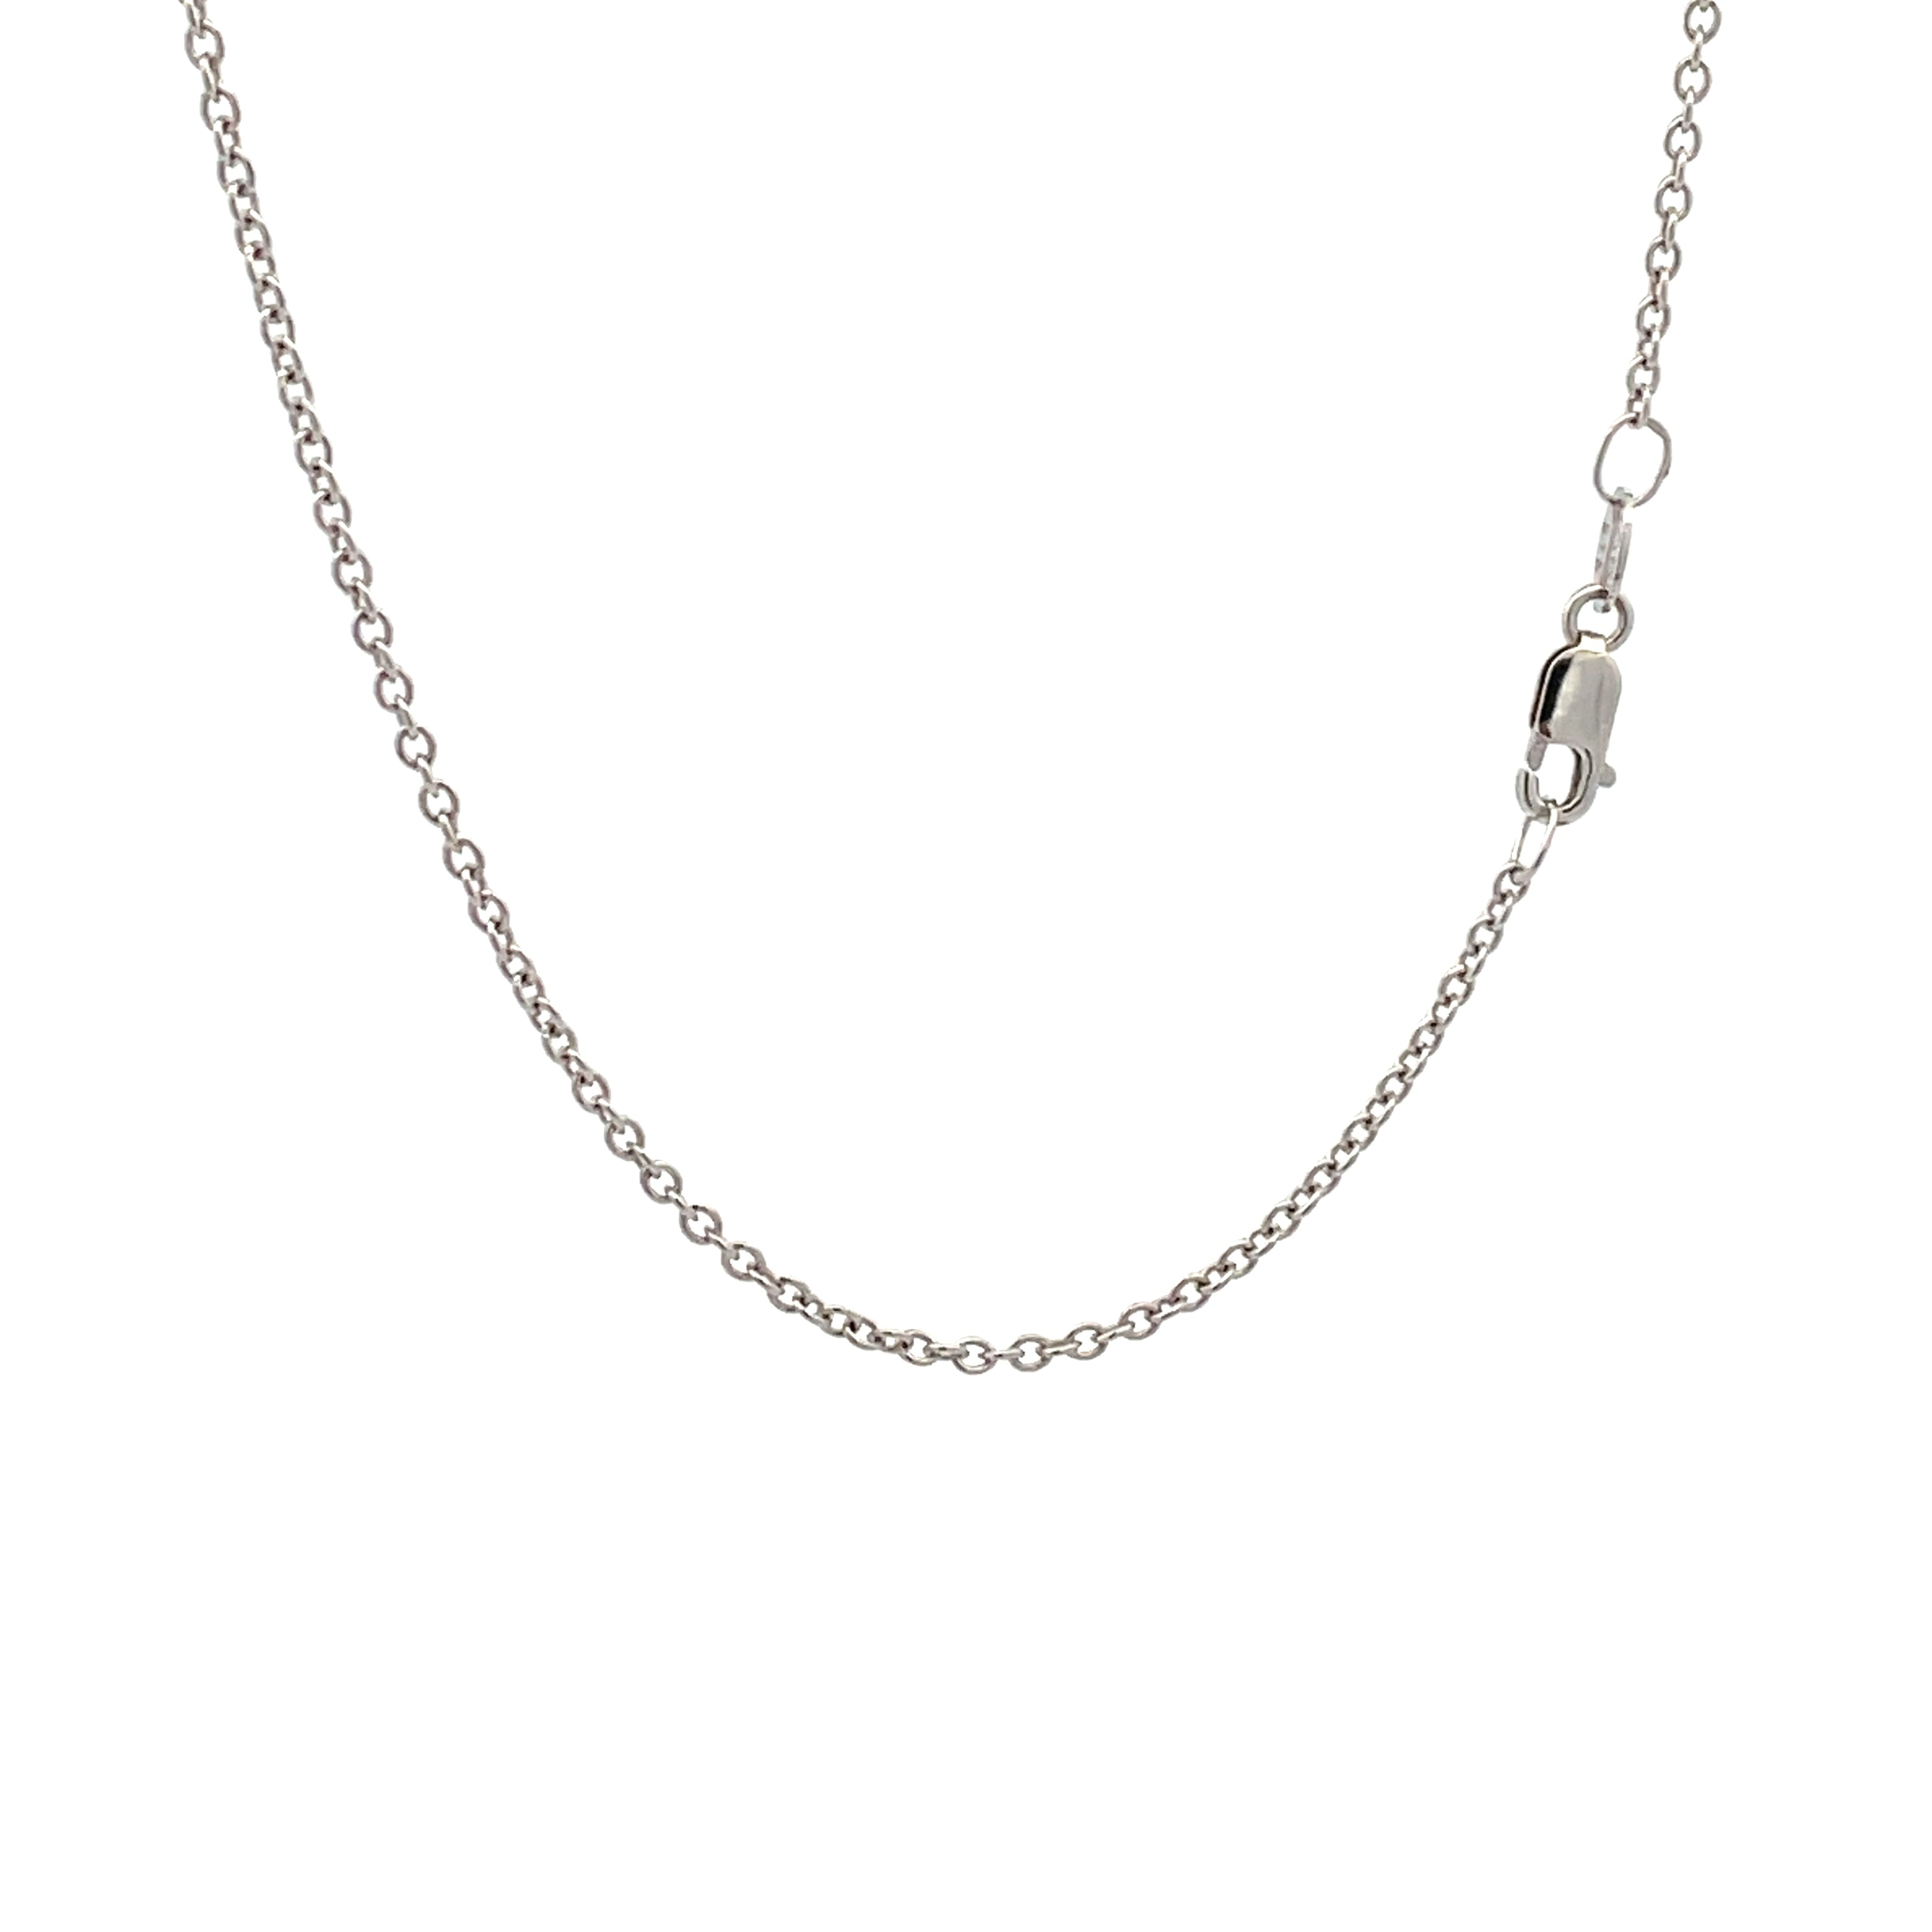 18K White Gold Polished 45cm Cable Chain Necklace